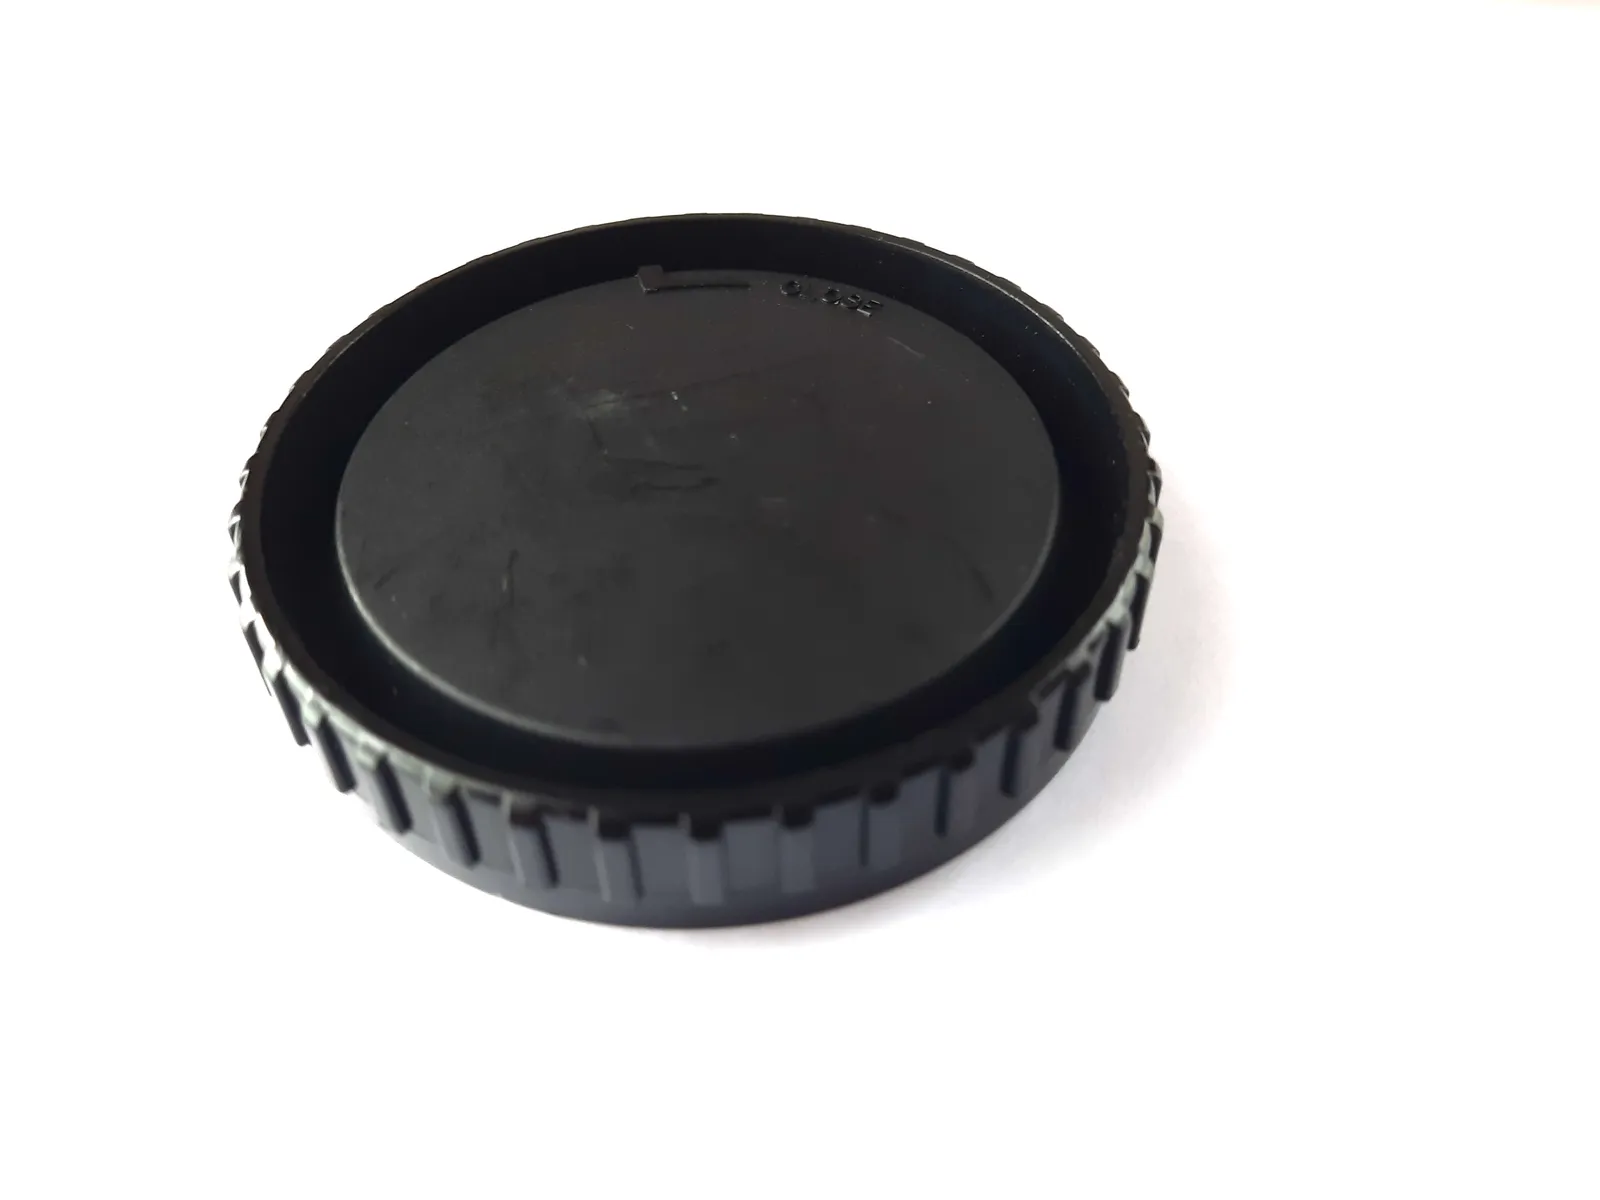 Used Unknown brand Rear Lens Cap for Minolta AF MA A mount B00607